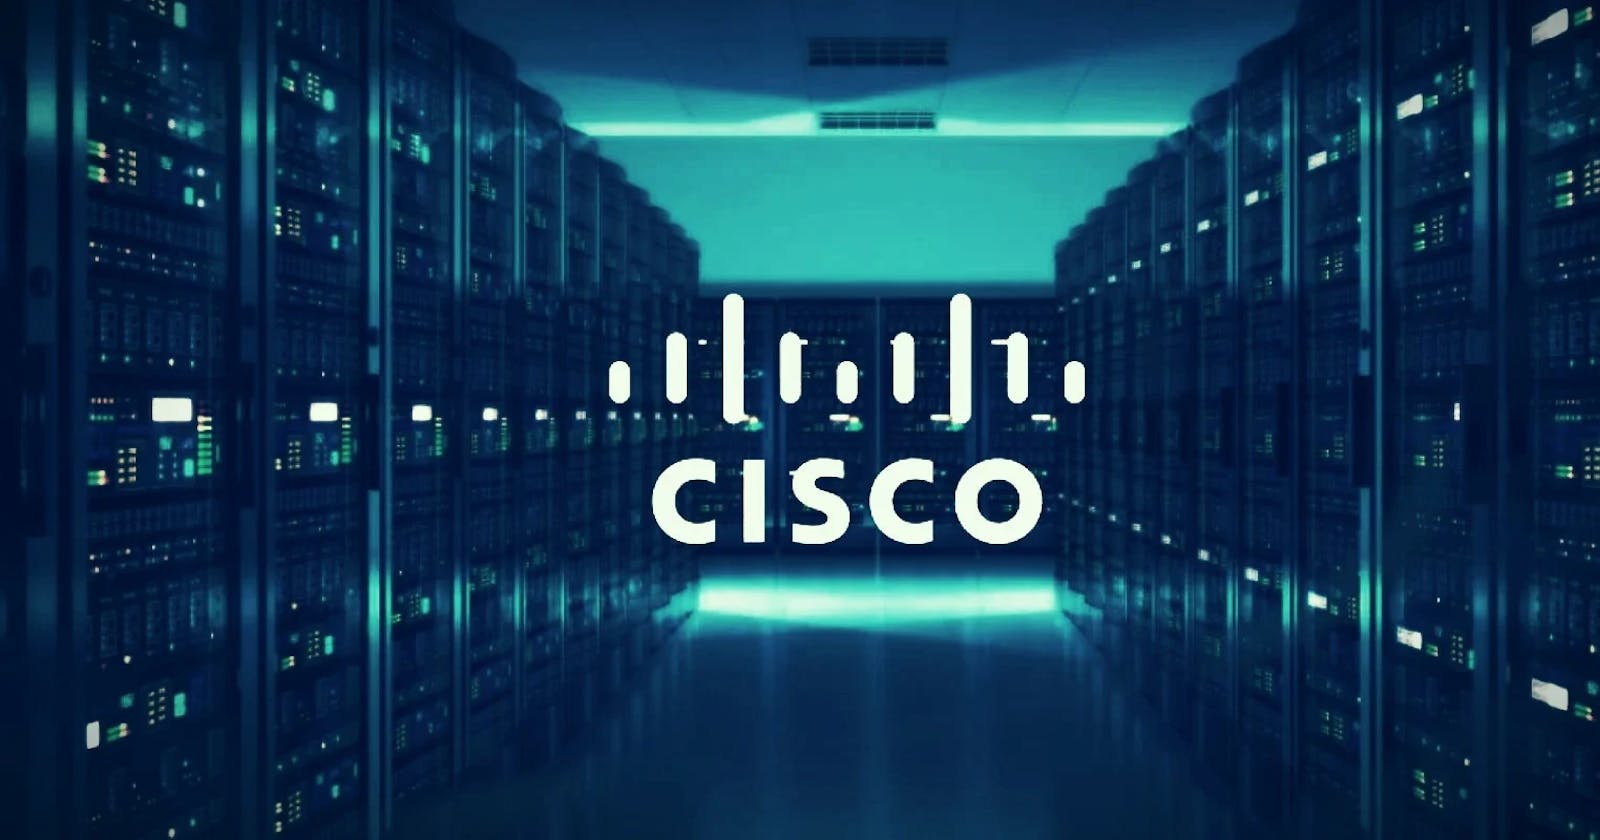 How to rate limit a host with Cisco ASA